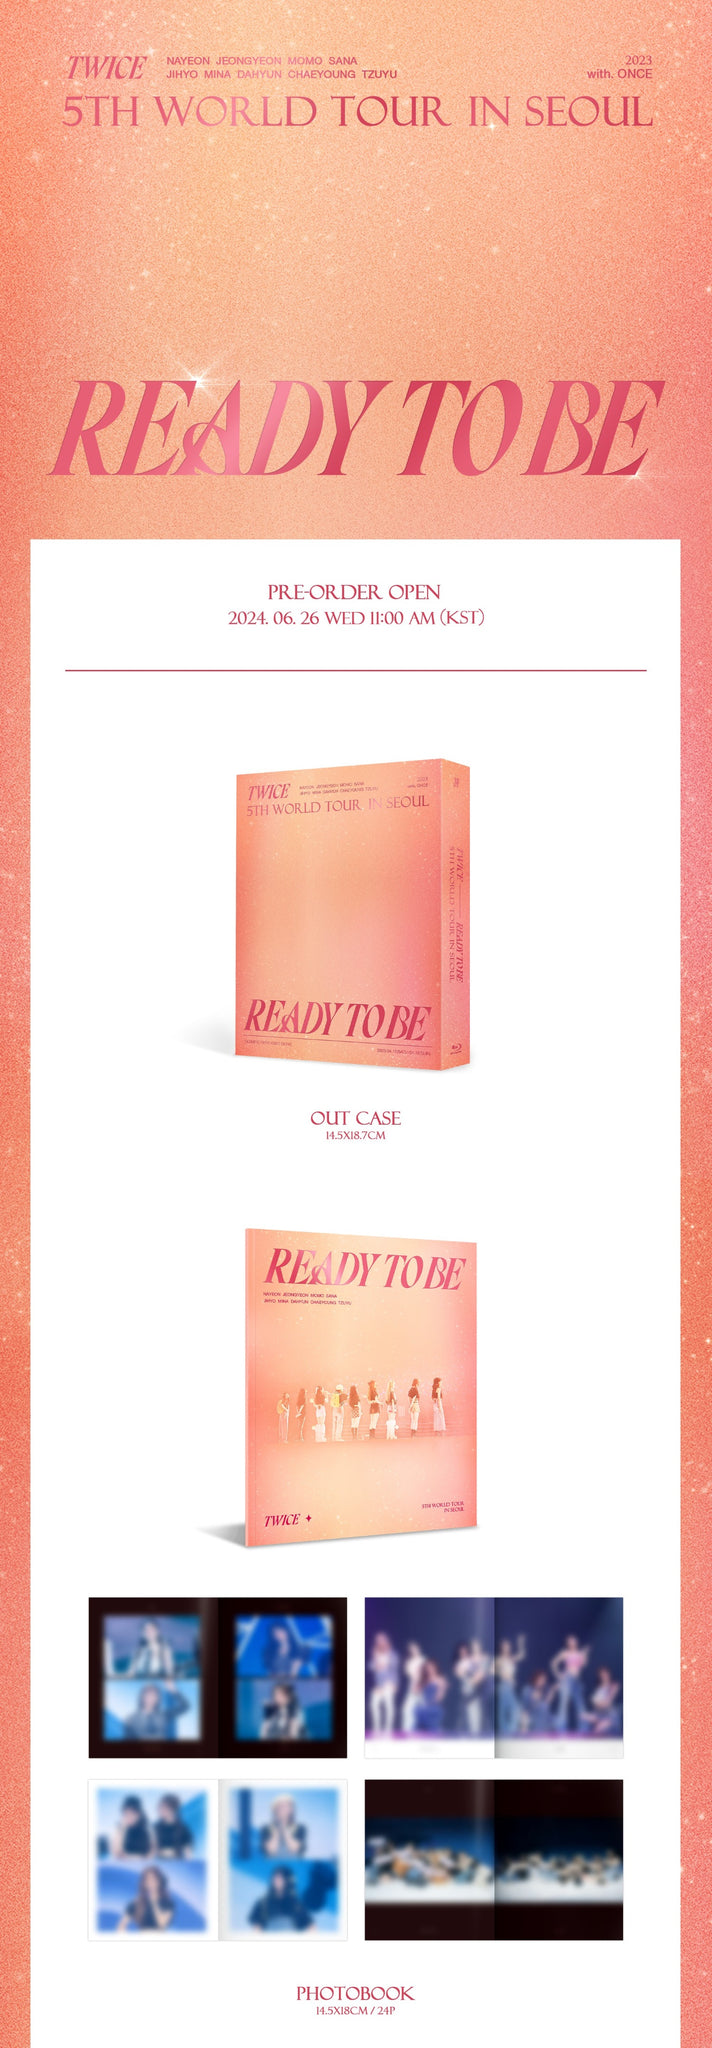 TWICE 5TH WORLD TOUR 'READY TO BE' IN SEOUL Blu-ray Inclusions: Out Case, Photobook